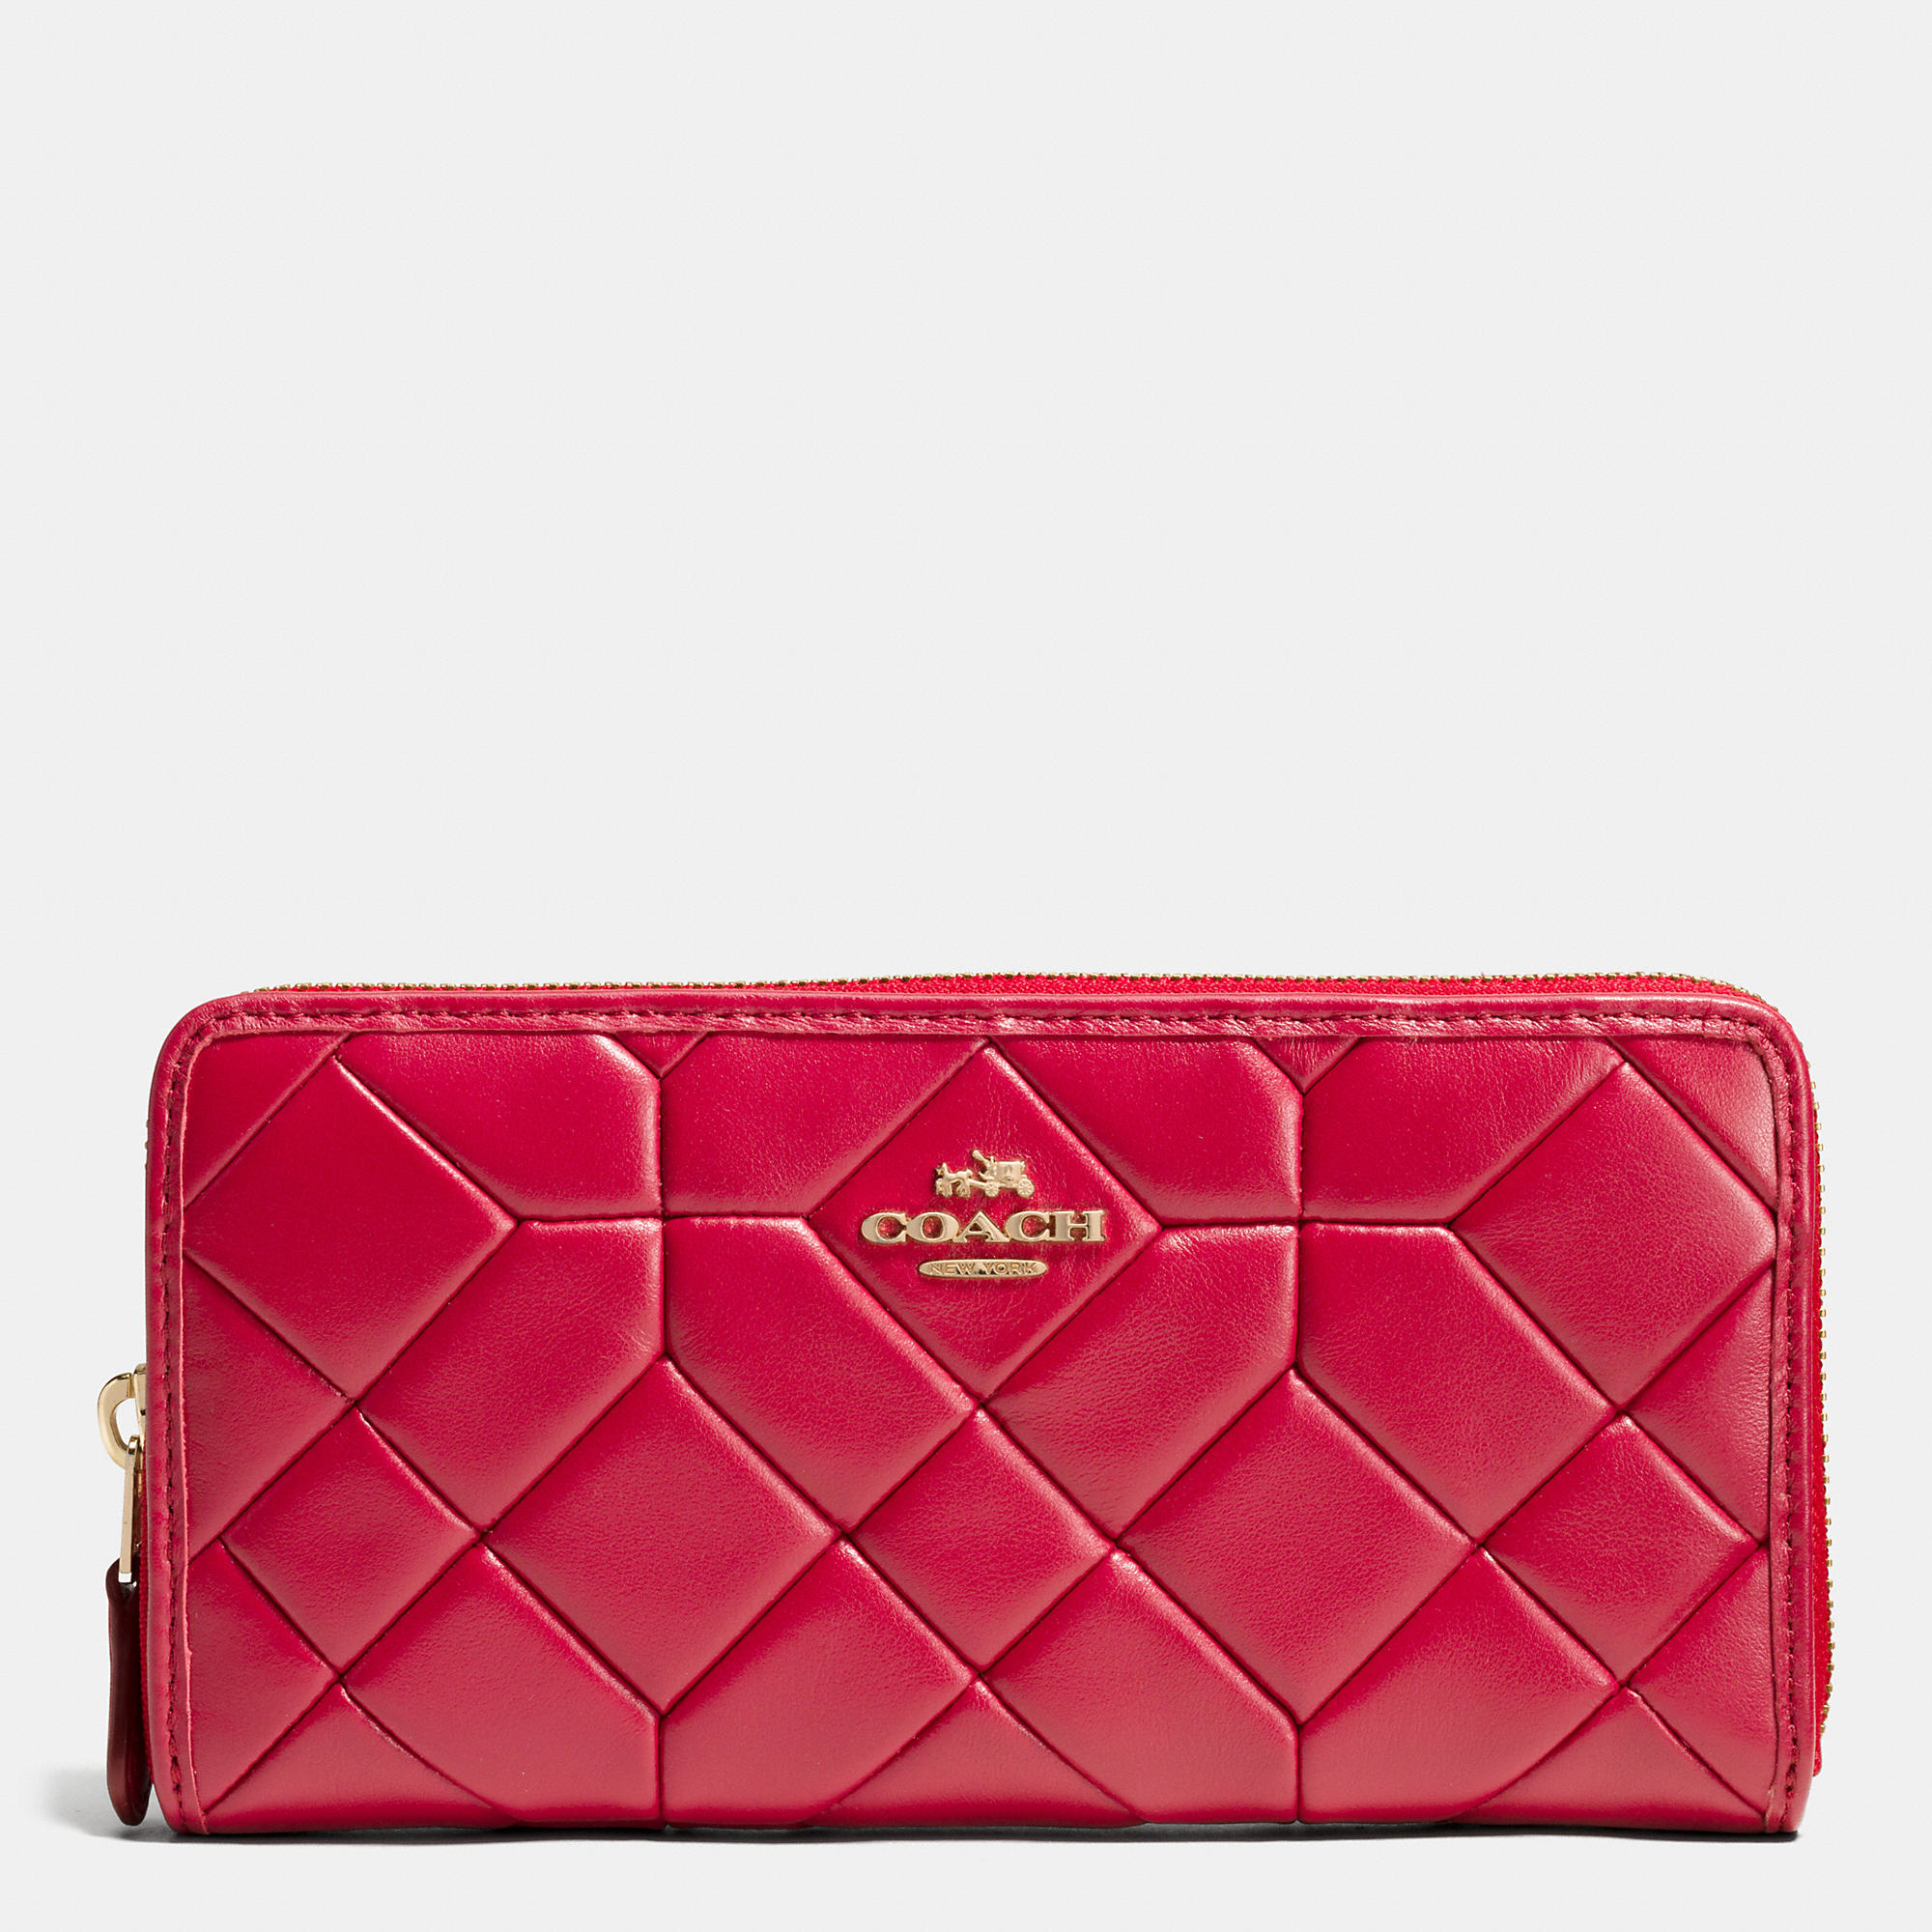 COACH Accordion Zip Wallet In Canyon Quilt Leather in Red | Lyst